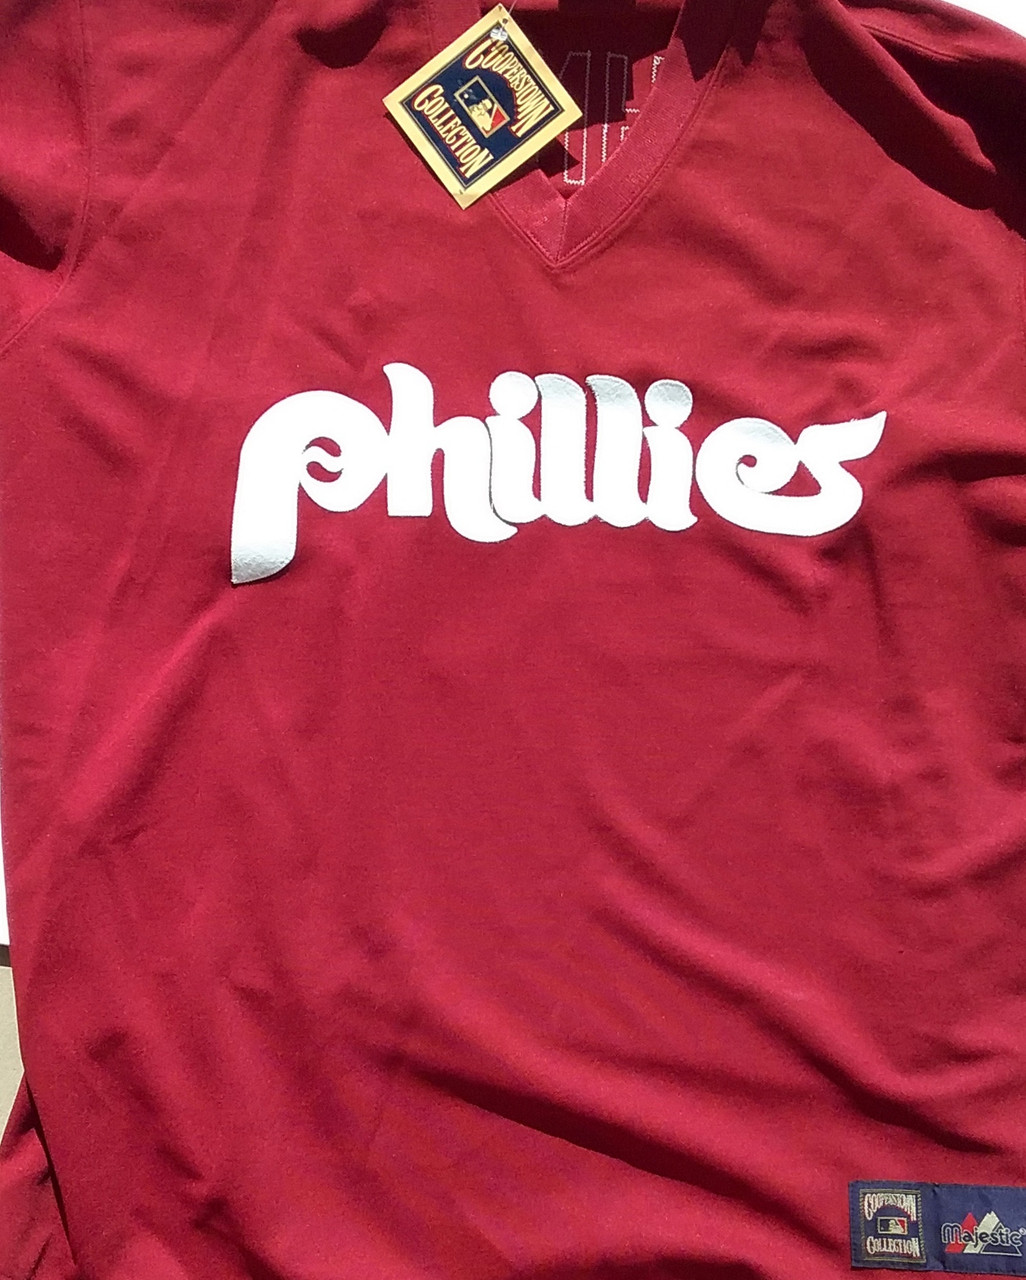 mike schmidt mitchell and ness jersey